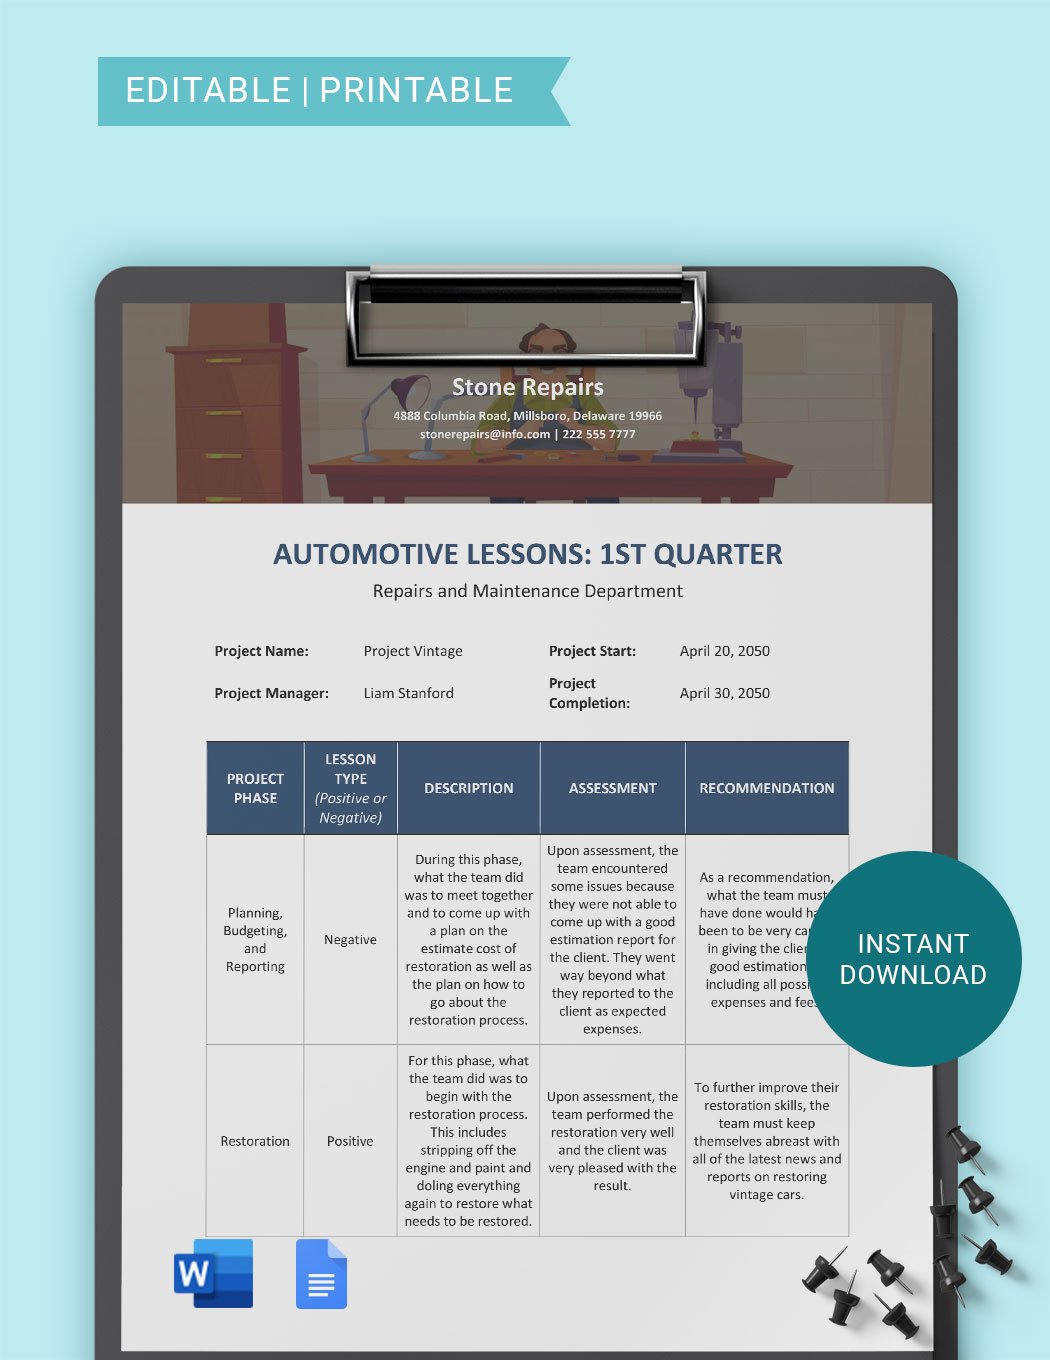 Automotive Lessons Learned Template